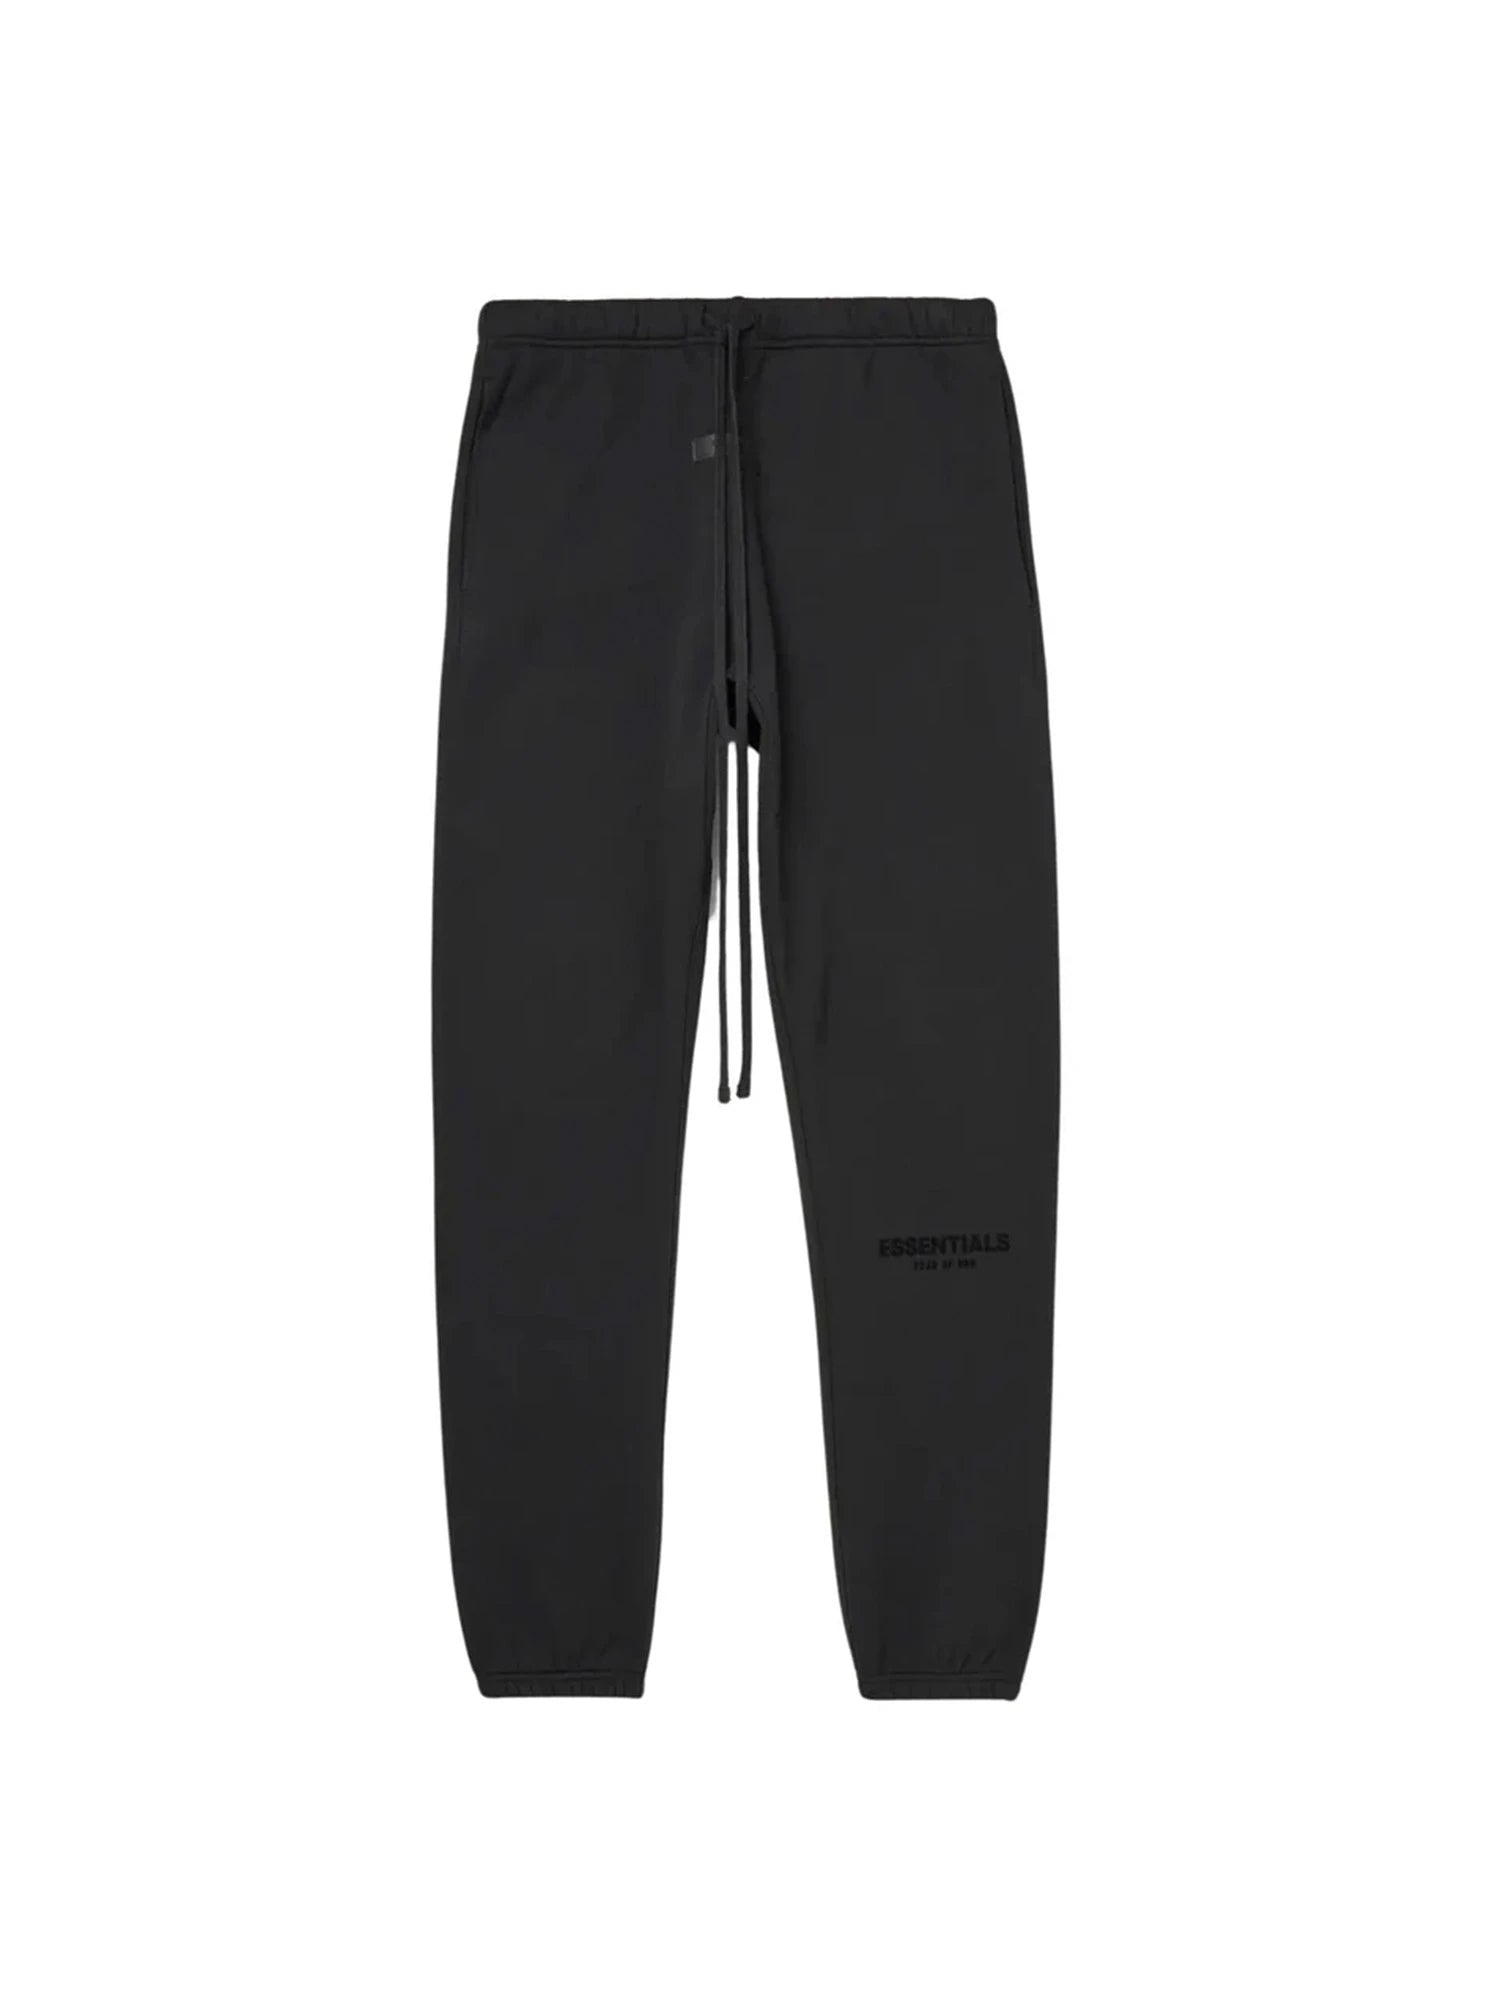 Fear Of God Essentials Tracksuit S22 Limo Black